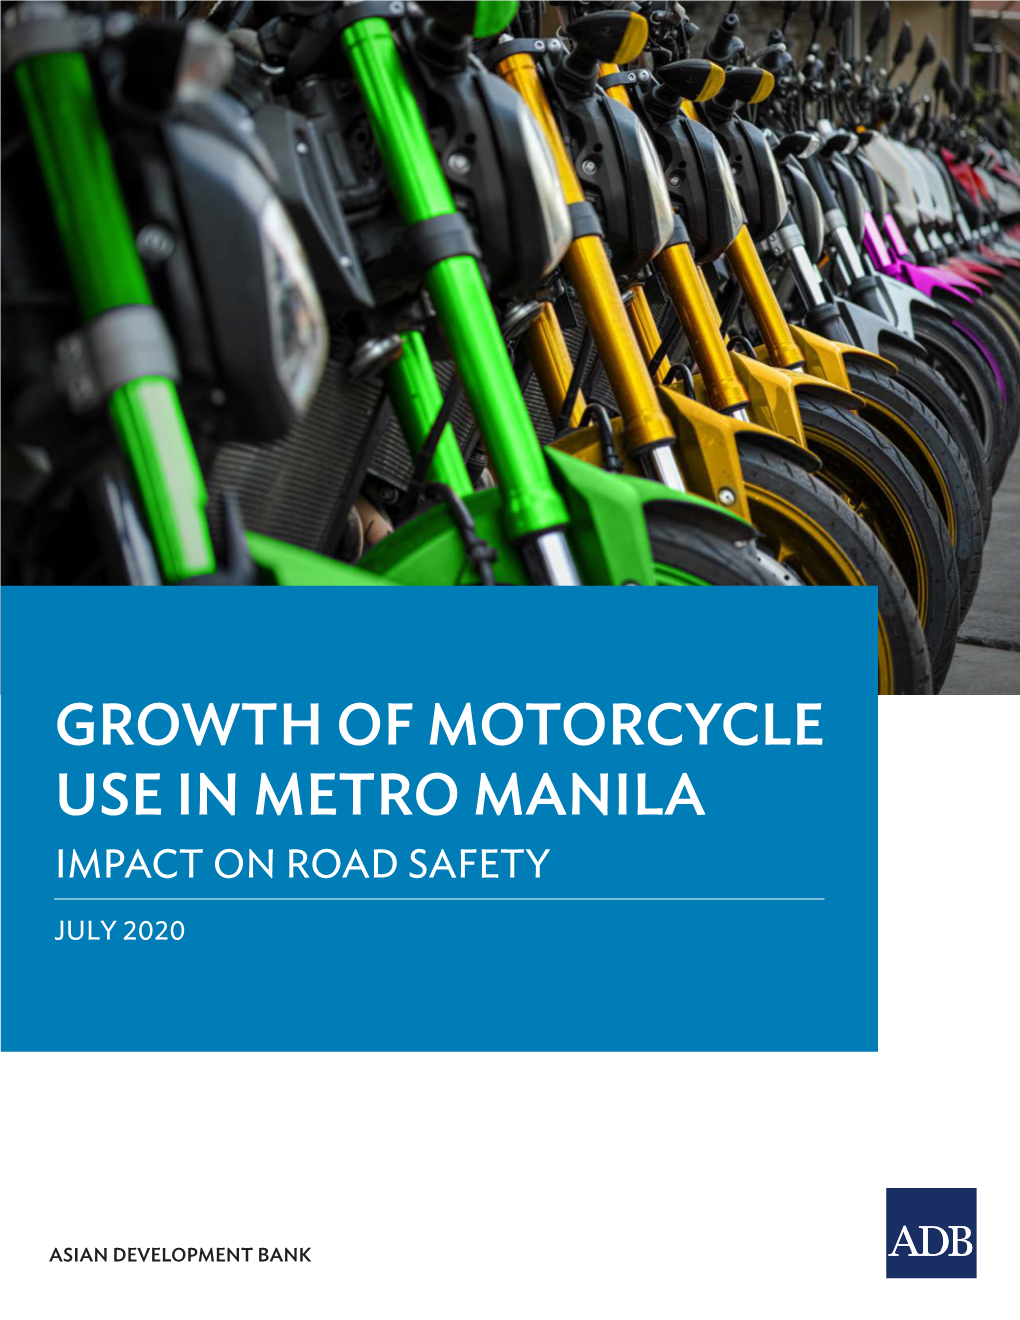 Growth of Motorcycle Use in Metro Manila: Impact on Road Safety